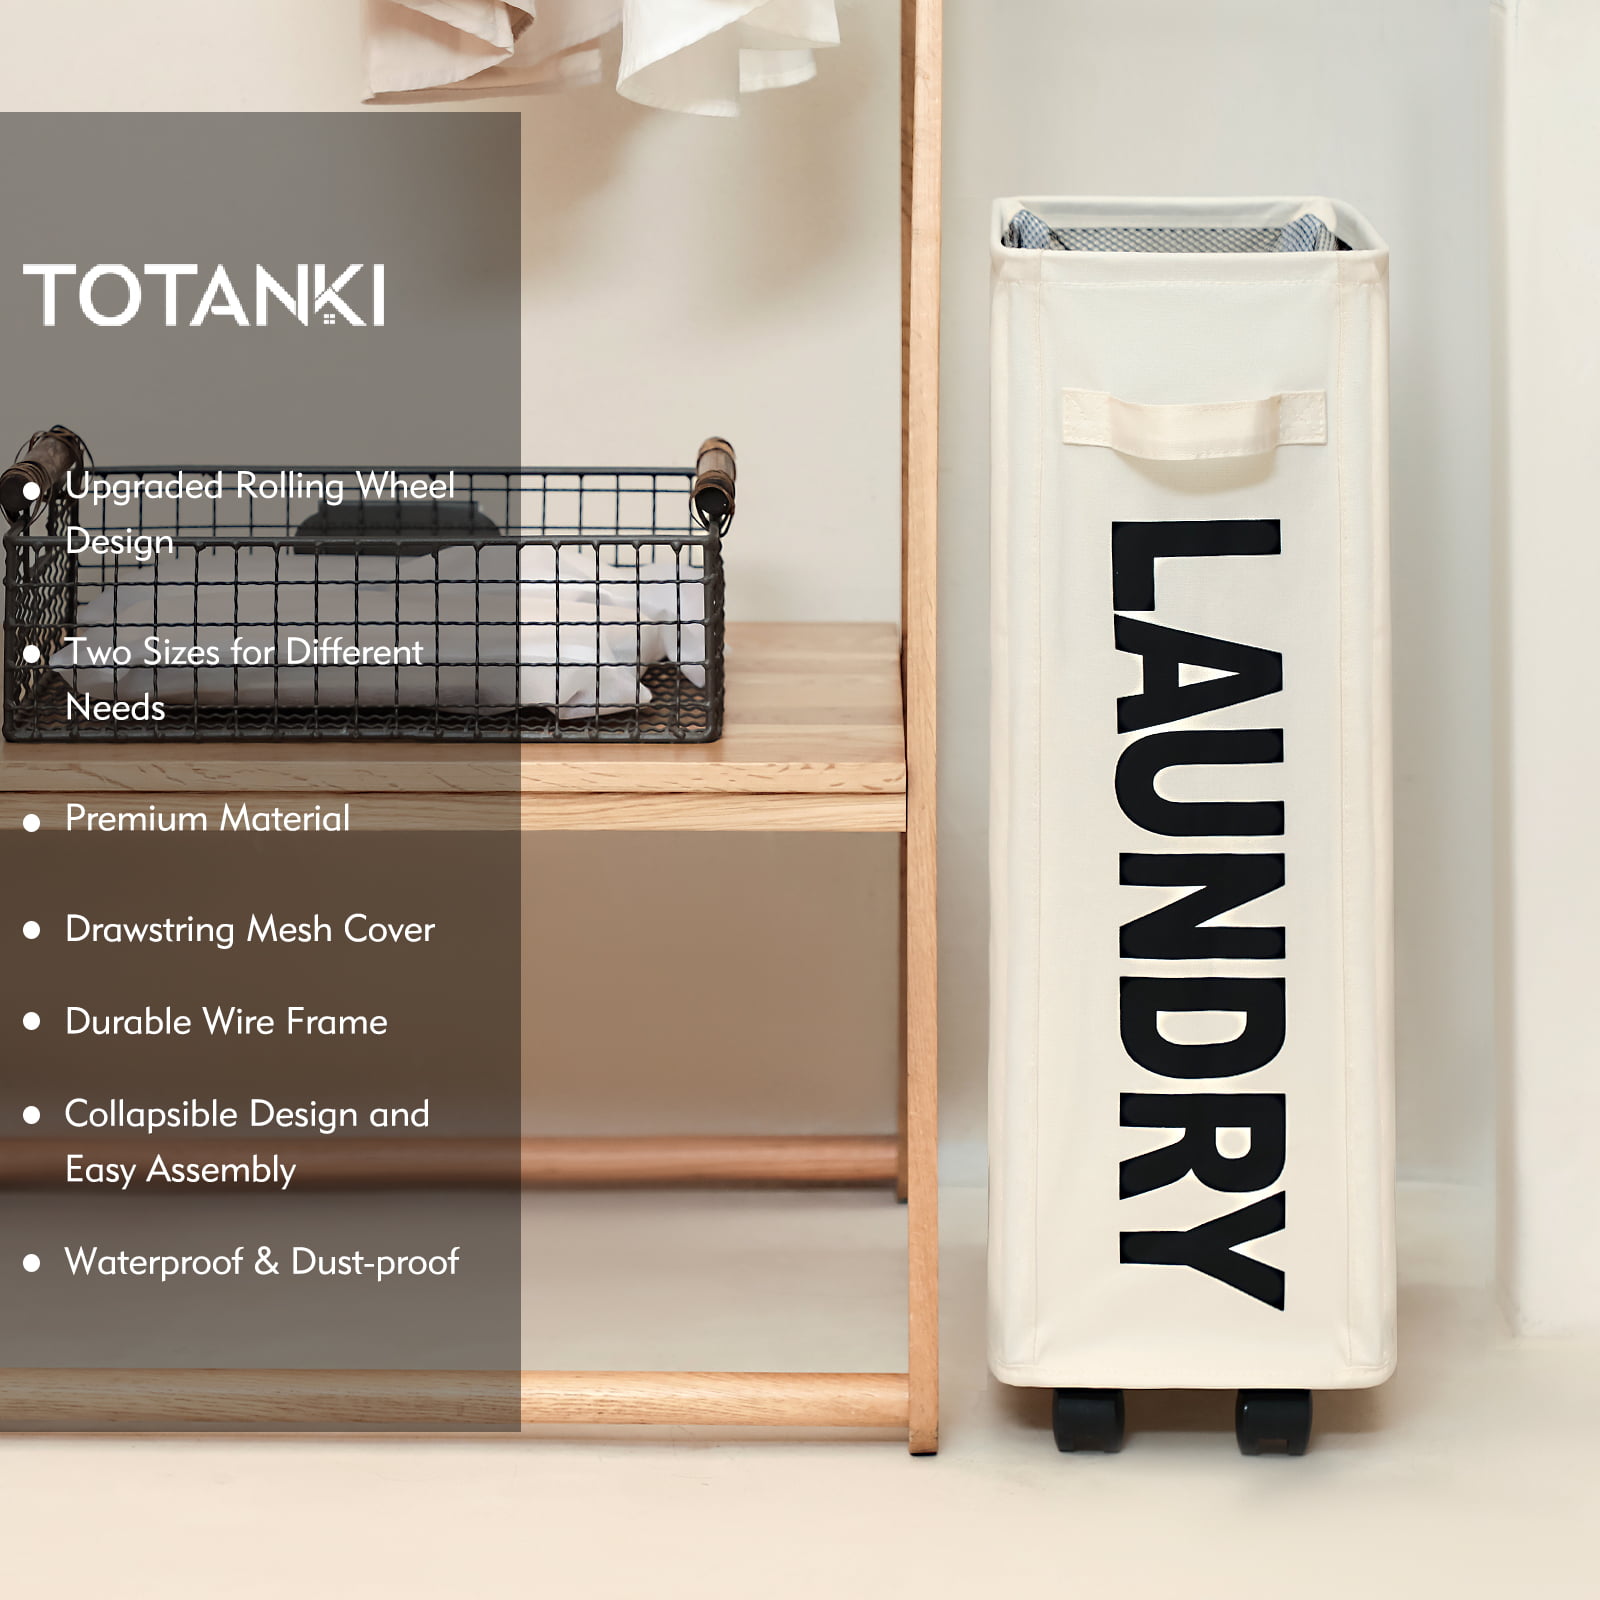 TOTANKI 22 Rolling Slim Laundry Basket with Handle on Wheels (4 Colors), Foldable  Laundry Hamper, Collapsible Laundry Sorter and Organizer, Tall Storage Basket  Bin (Black)